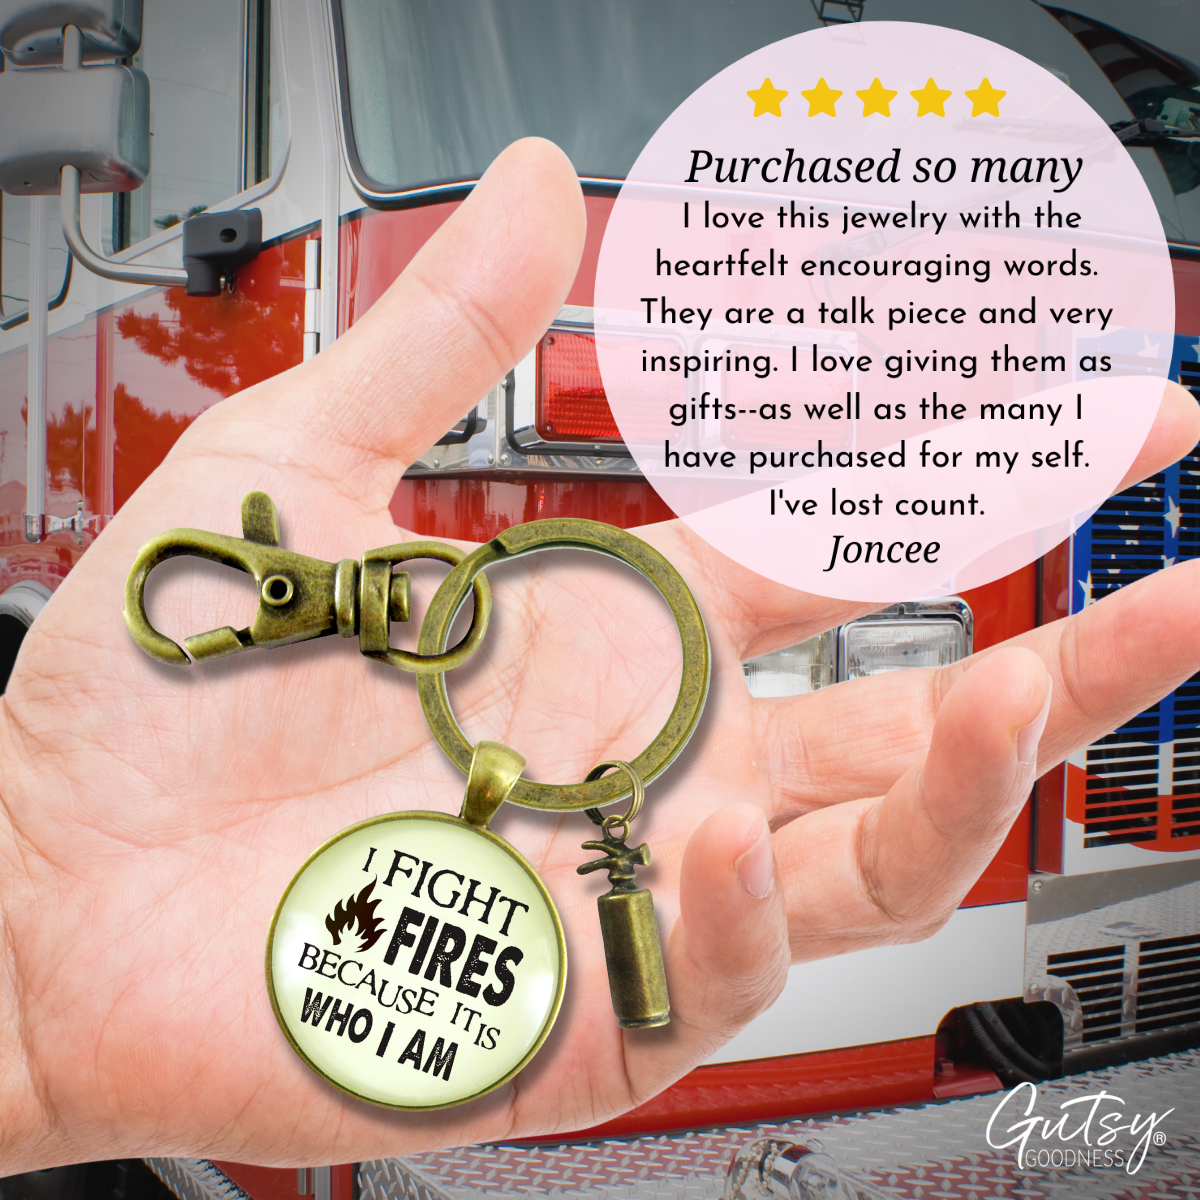 Firefighter Keychain I Fight Fires BecauseAppreciation Gift Jewelry Extinguisher Charm - Gutsy Goodness Handmade Jewelry;Firefighter Keychain I Fight Fires Becauseappreciation Gift Jewelry Extinguisher Charm - Gutsy Goodness Handmade Jewelry Gifts